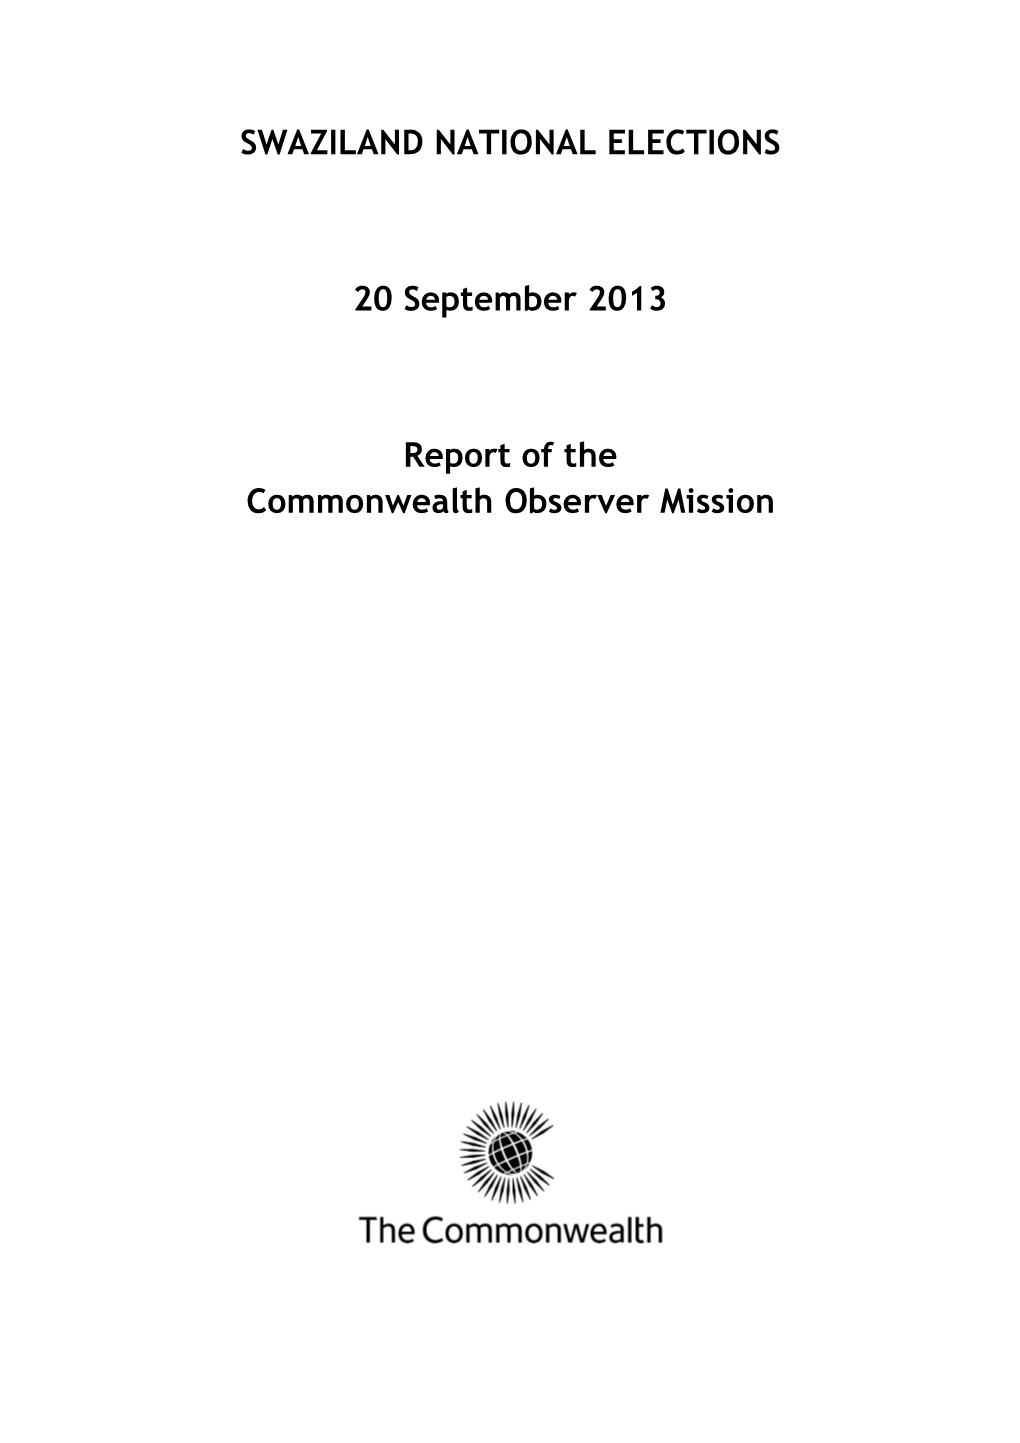 SWAZILAND NATIONAL ELECTIONS 20 September 2013 Report of The